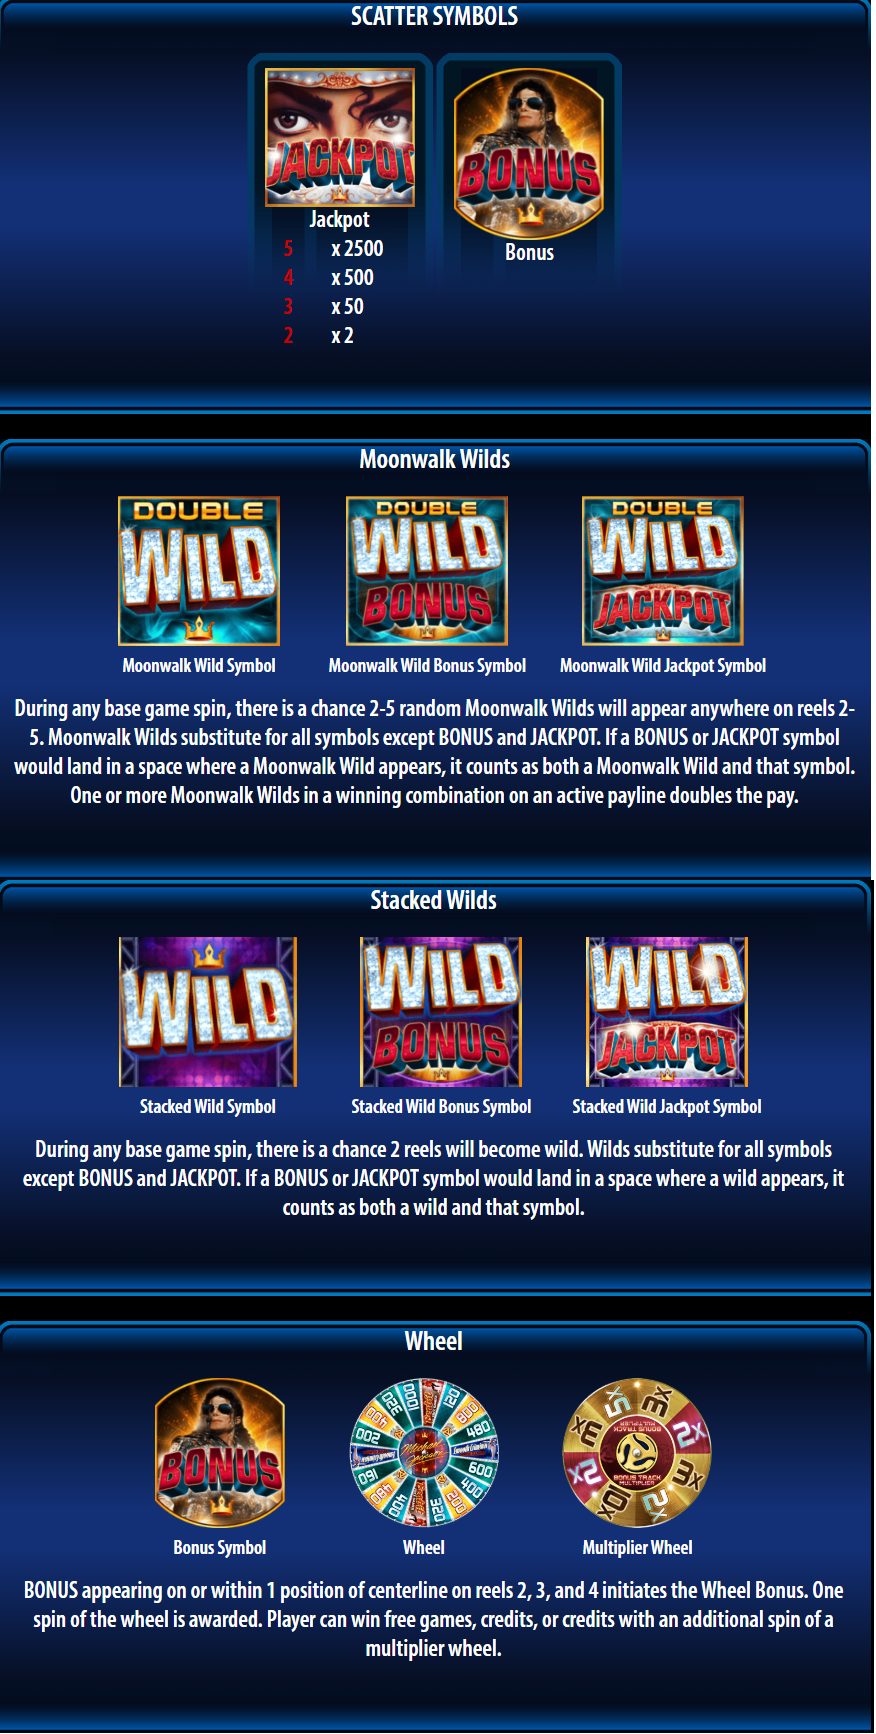 These a screencap of the digital slot machine (a.k.a . fruit machine) showing the various bonus features. You can read the details of these bonus features under the picture.